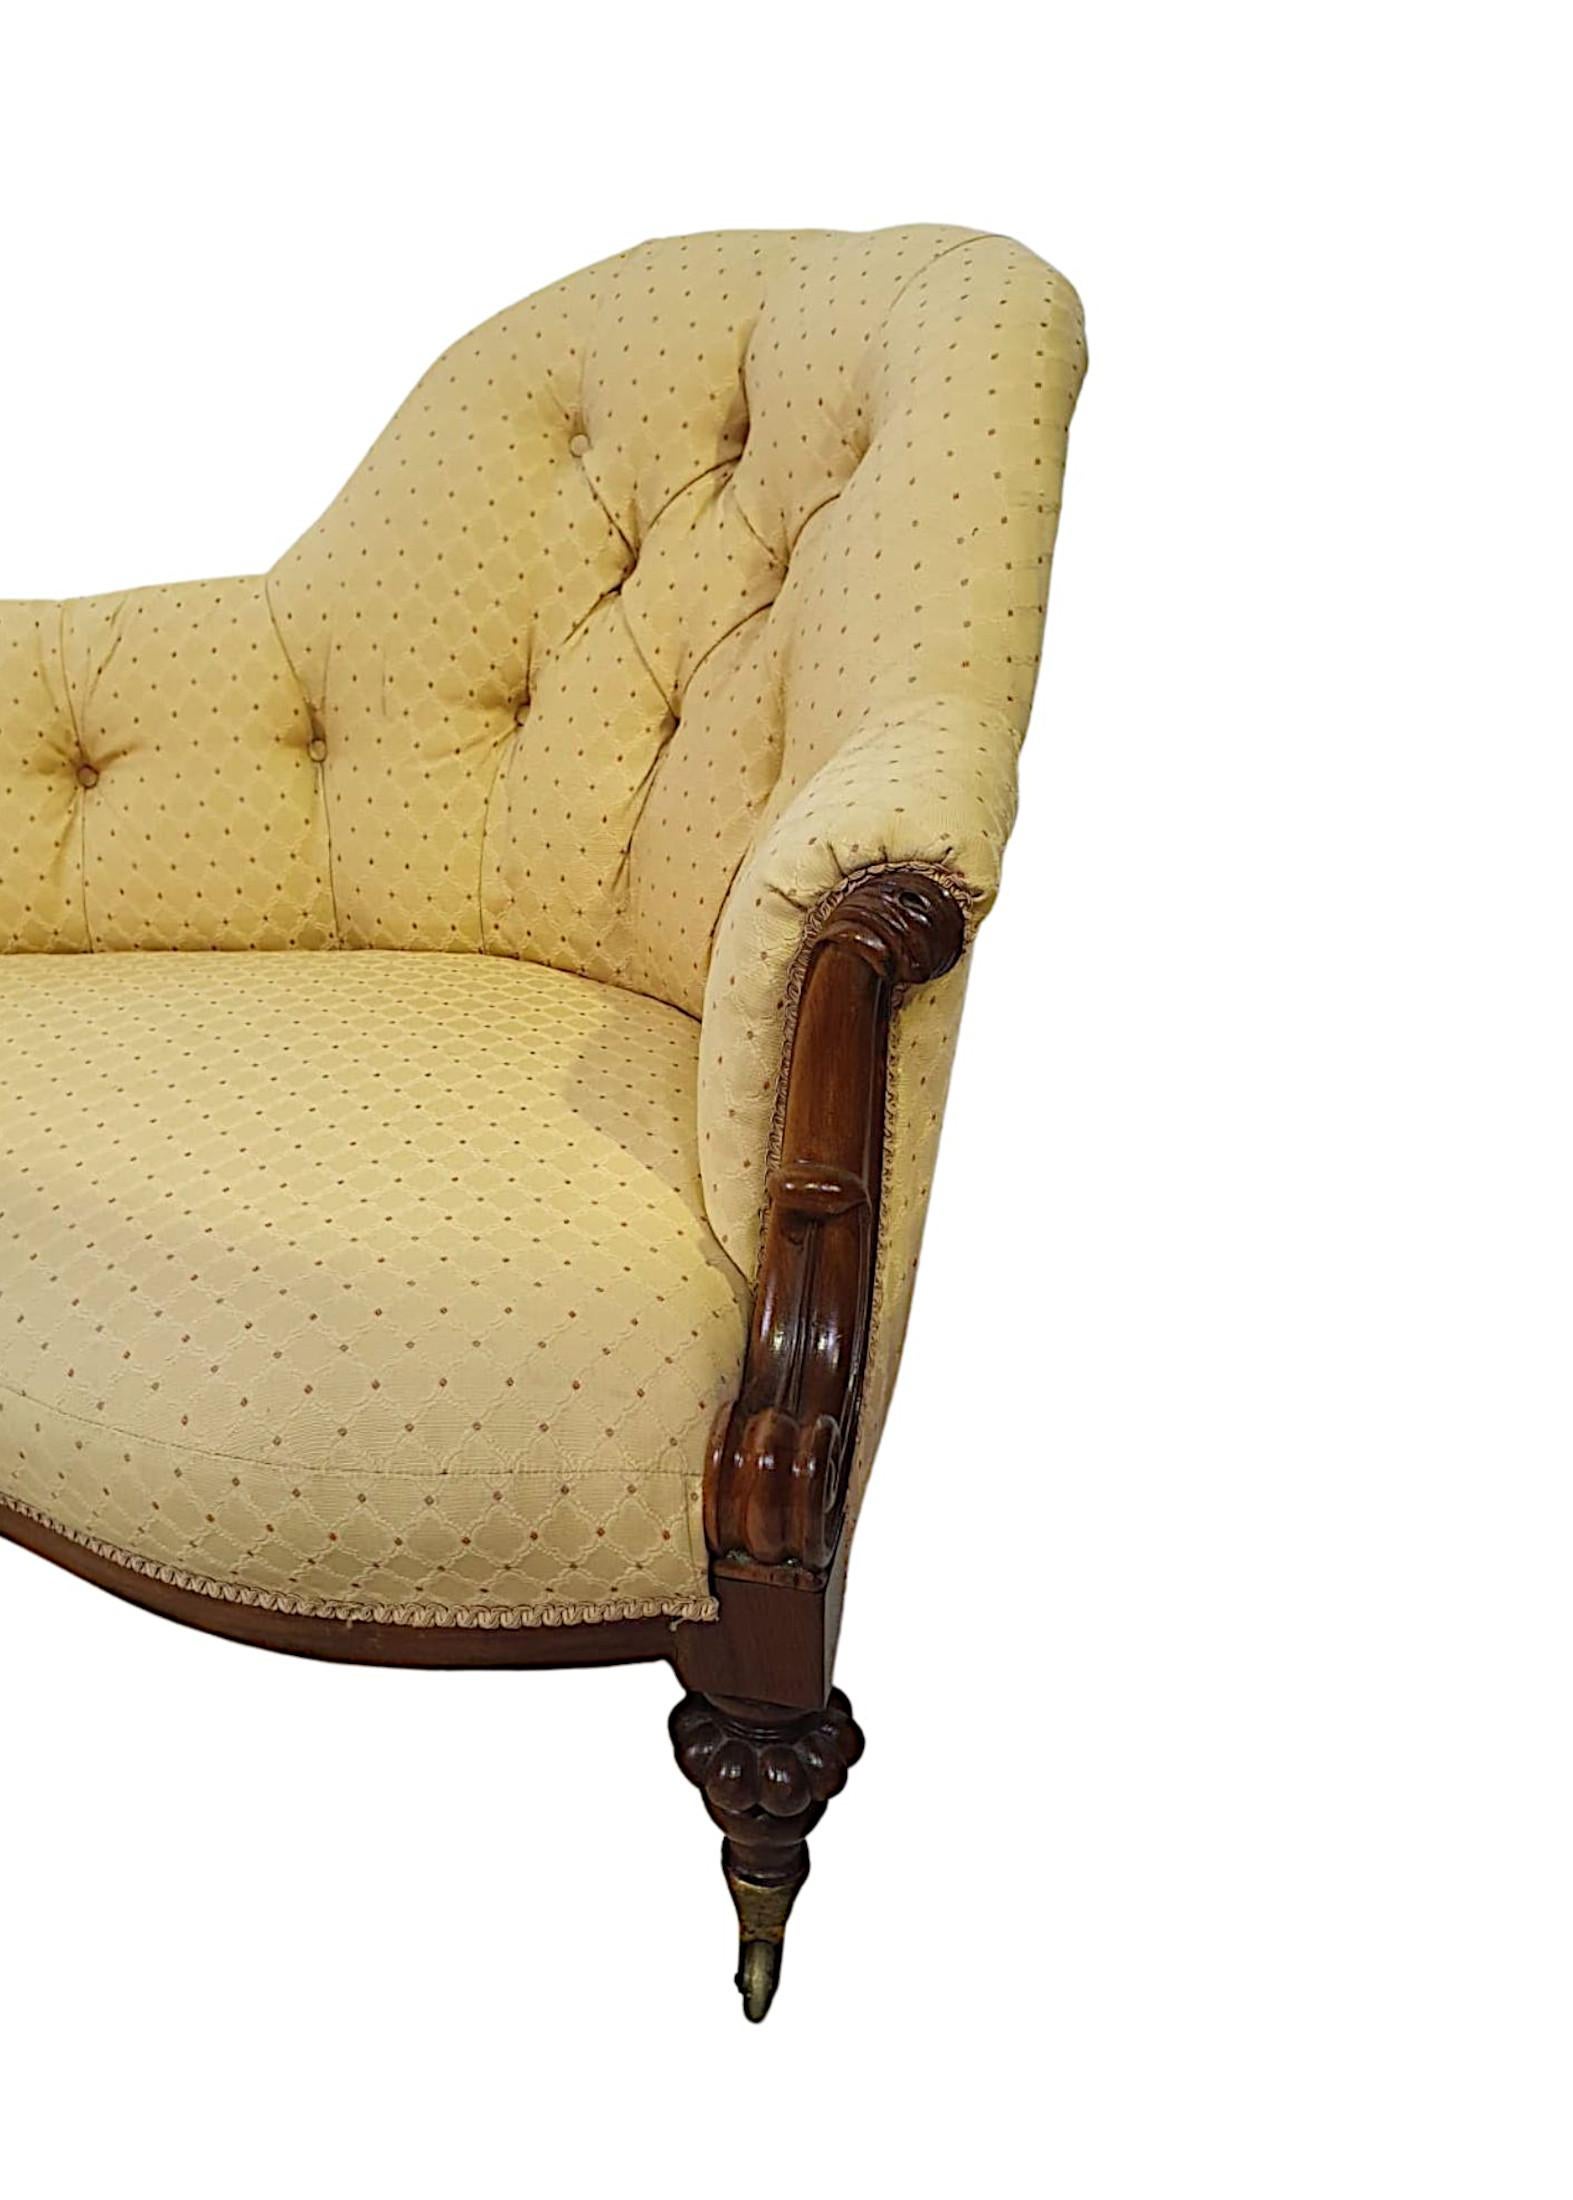 English Gorgeous 19th Century Humpback Settee For Sale